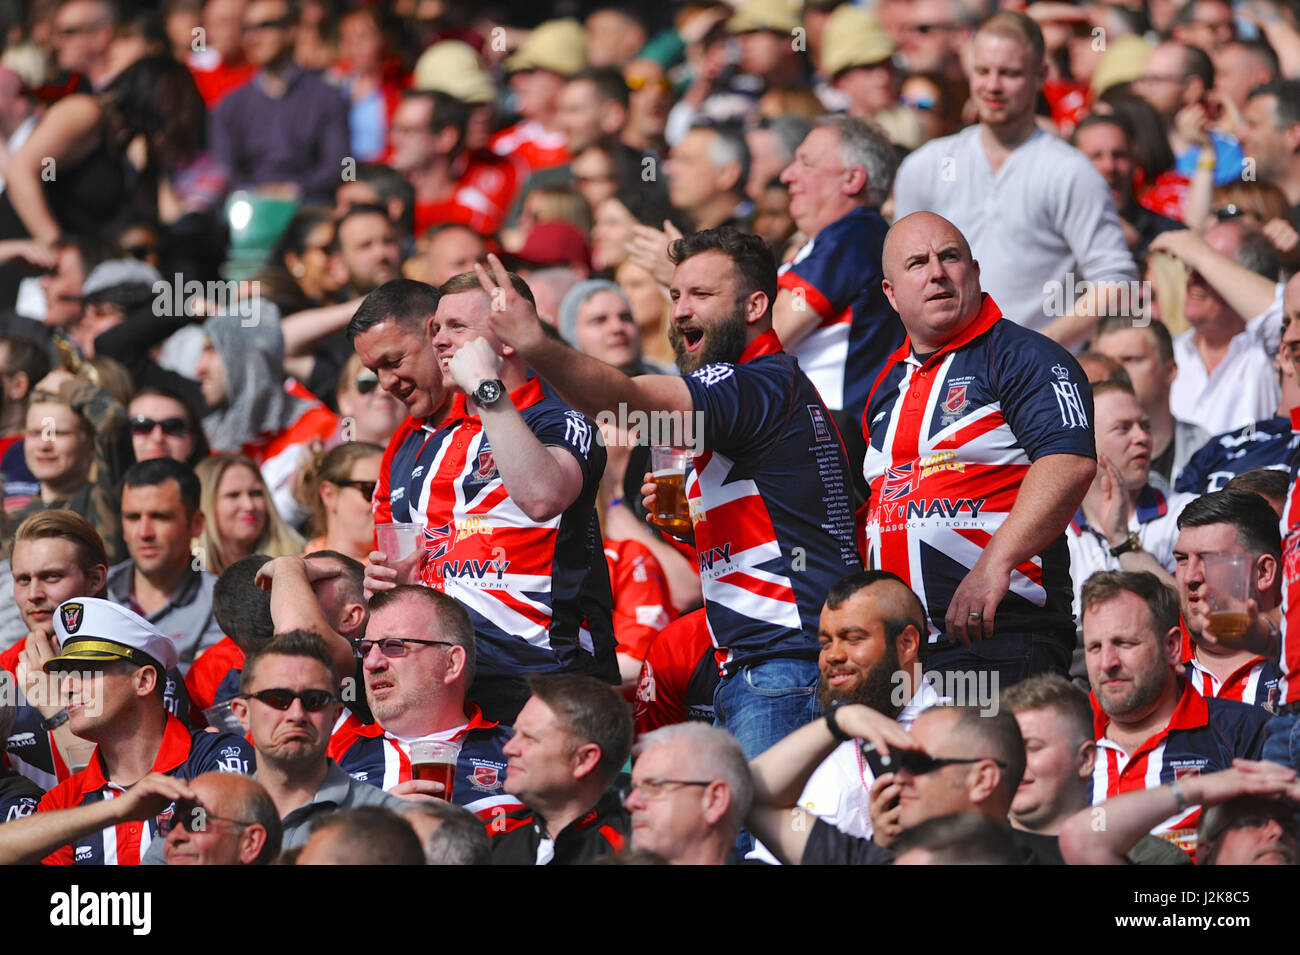 London, UK. 29th Apr, 2017. Patriotic rugby fans at the 100th annual Army Navy Rugby Match, Twickenham Stadium, London, UK.  The match is the annual rugby union match played between the senior XV teams of the Royal Navy and British Army and marks the culmination of the annual Inter-Services Competition. Credit: Michael Preston/Alamy Live News Stock Photo